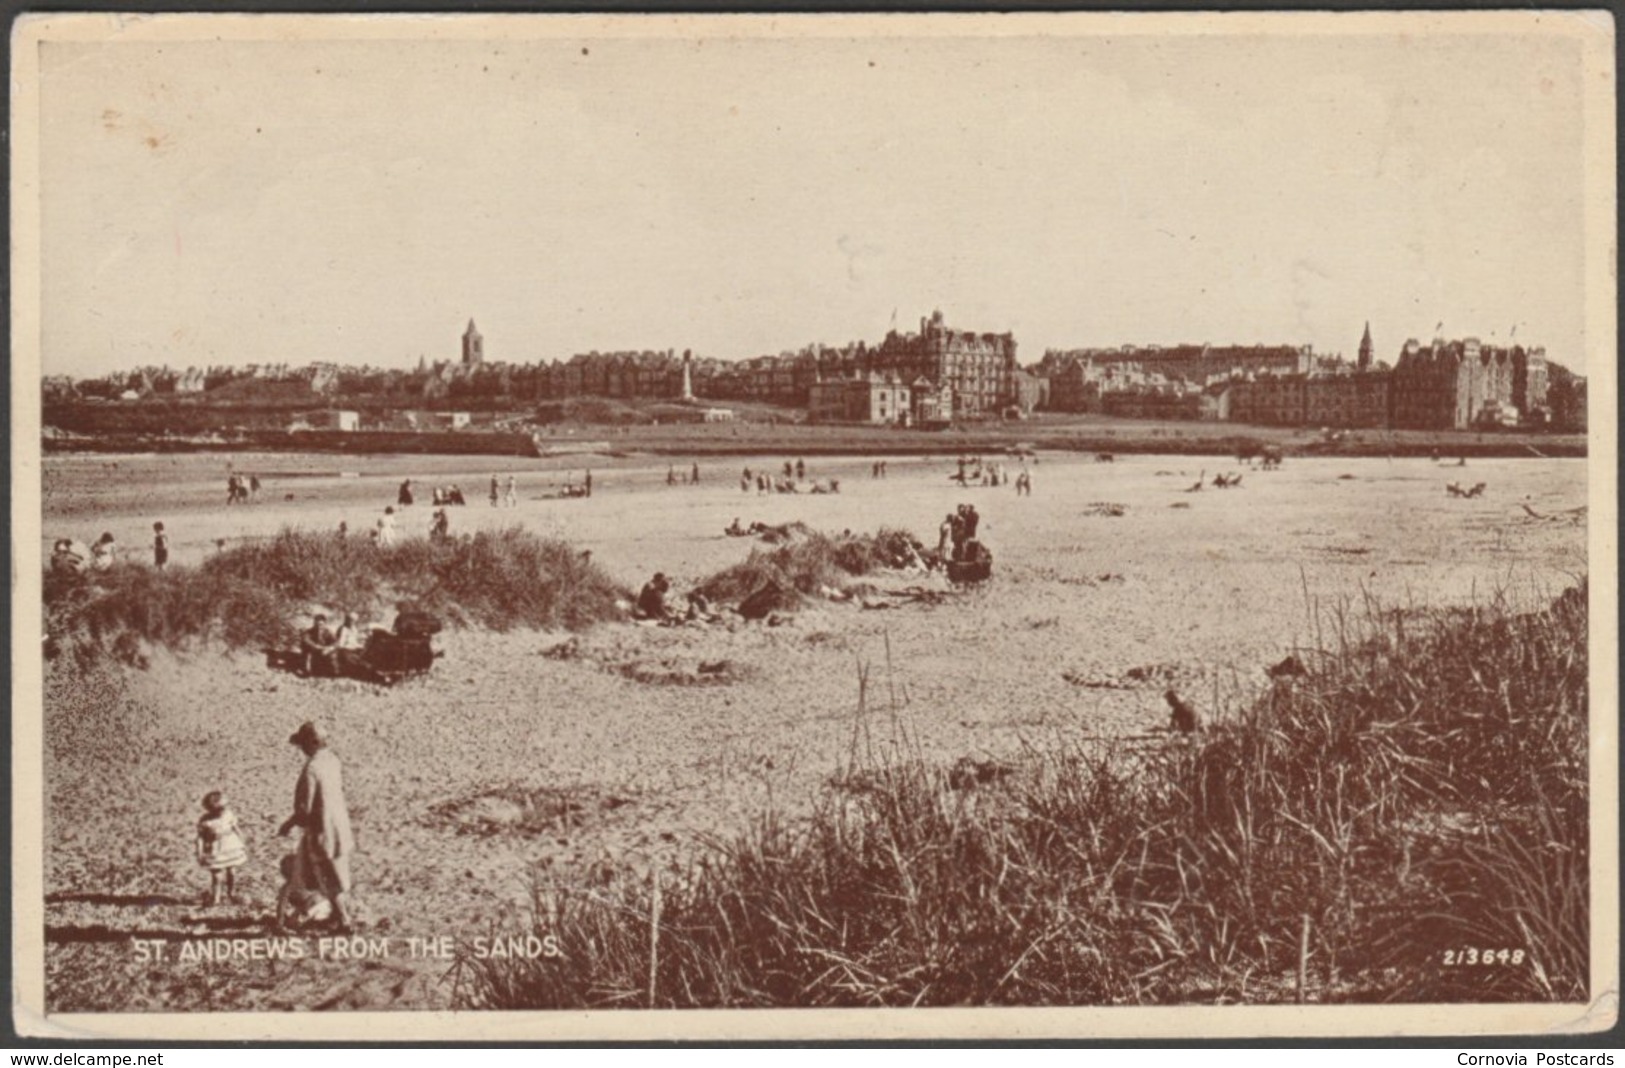 St Andrews From The Sands, Fife, 1946 - Valentine's Postcard - Fife